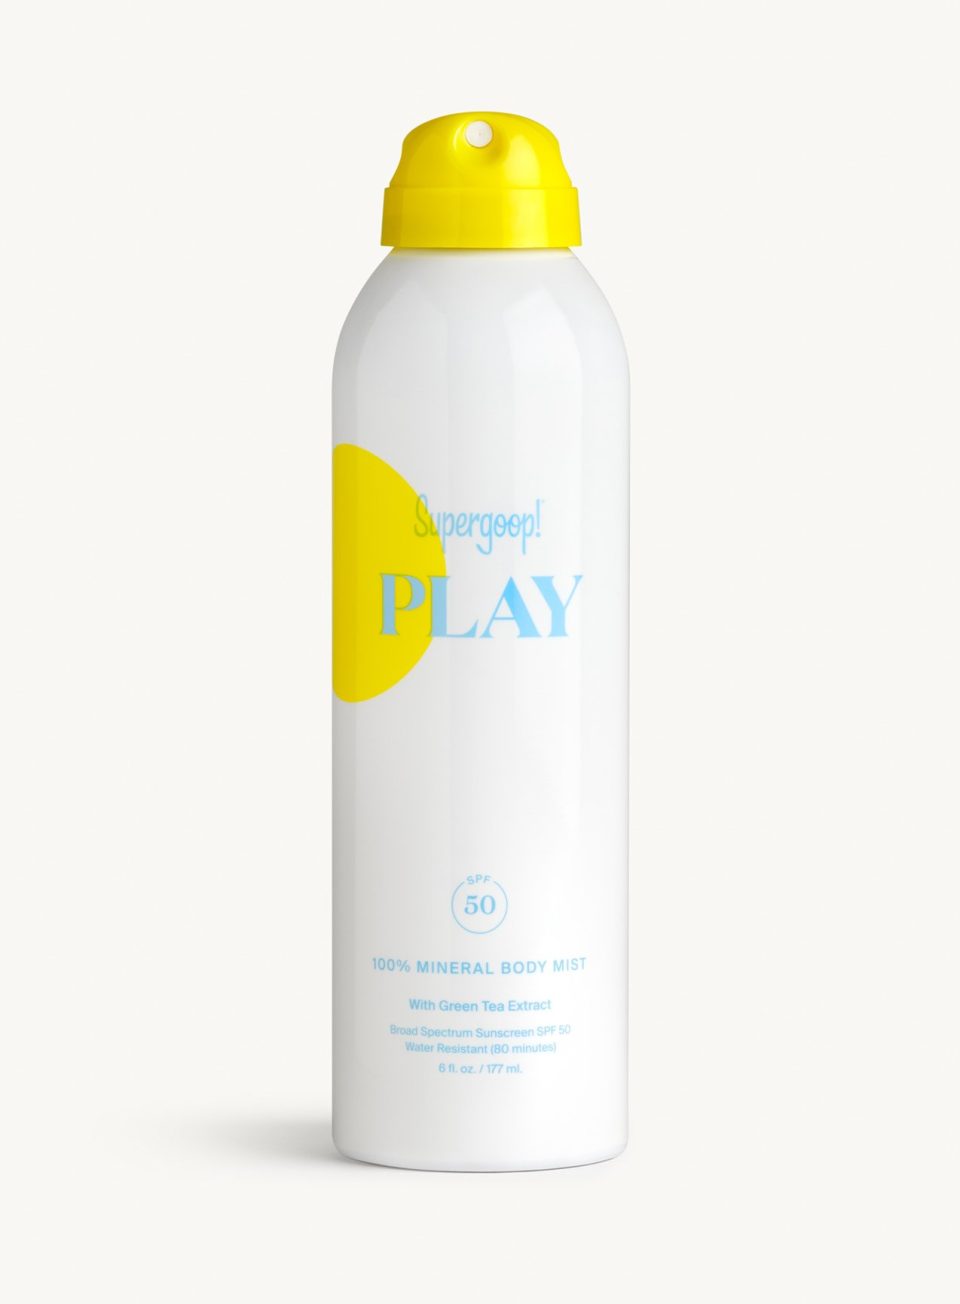 Supergoop! PLAY 100% Mineral Body Mist SPF 50 with Green Tea Extract